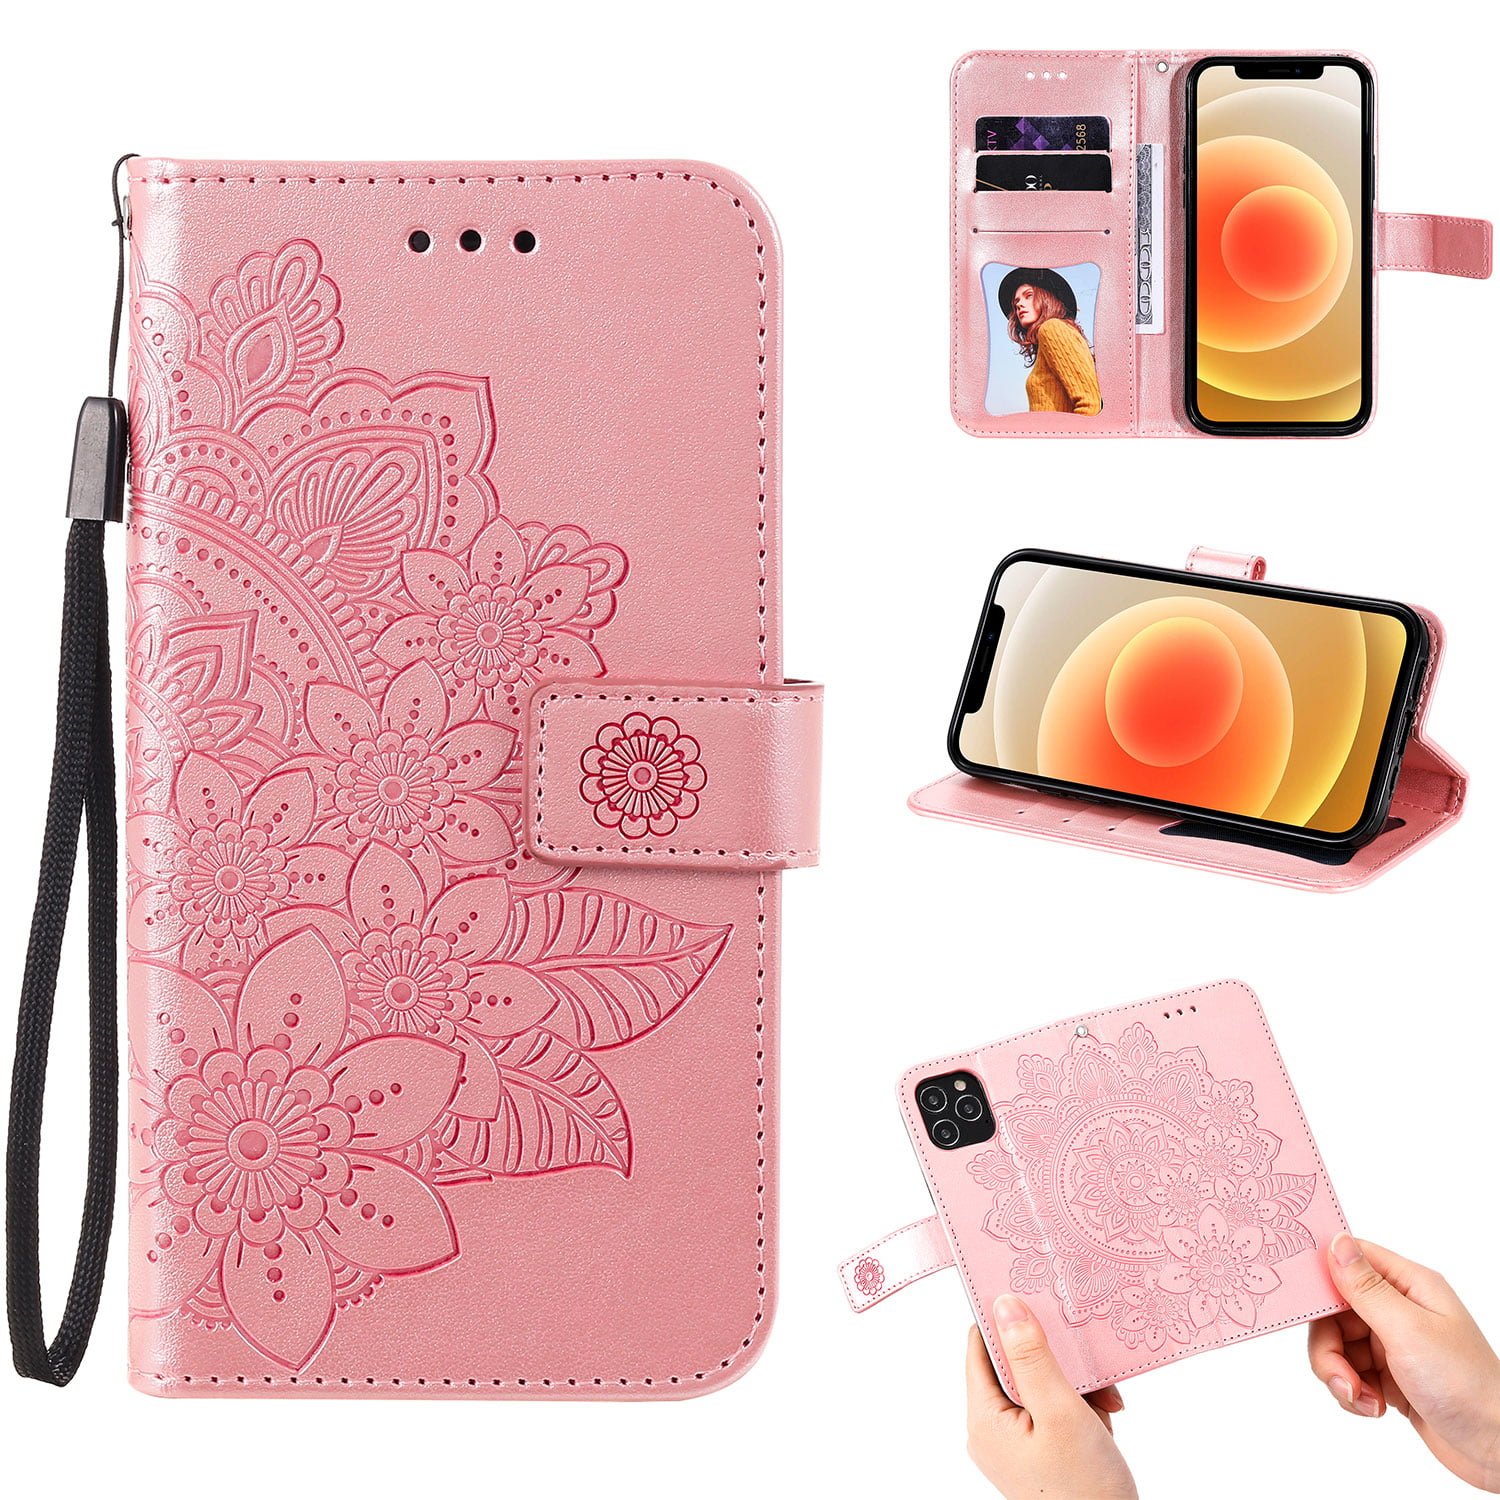 iPhone 11 Wallet Case 6.1 inch 2019, Allytech Slim Embossed FlowerPU  Leather with TPU Back Shockproof Kickstand Card Slots Magnetic Clasp  Detachable Hand Strap for Apple iPhone 11 6.1", Rosegold